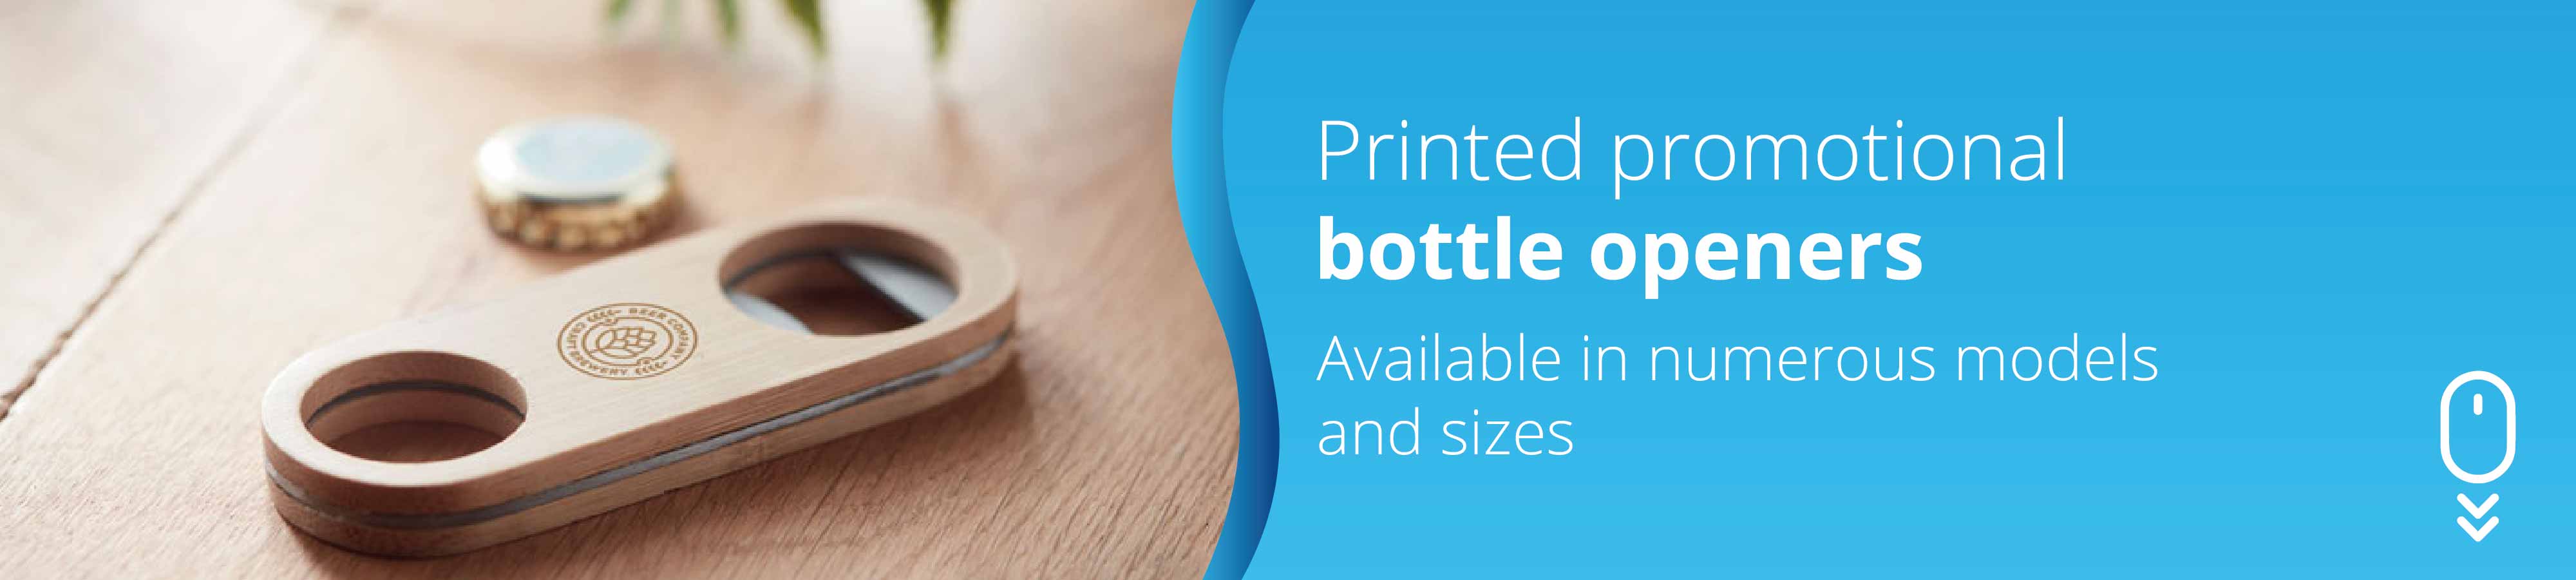 printed-promotional-bottle-openers